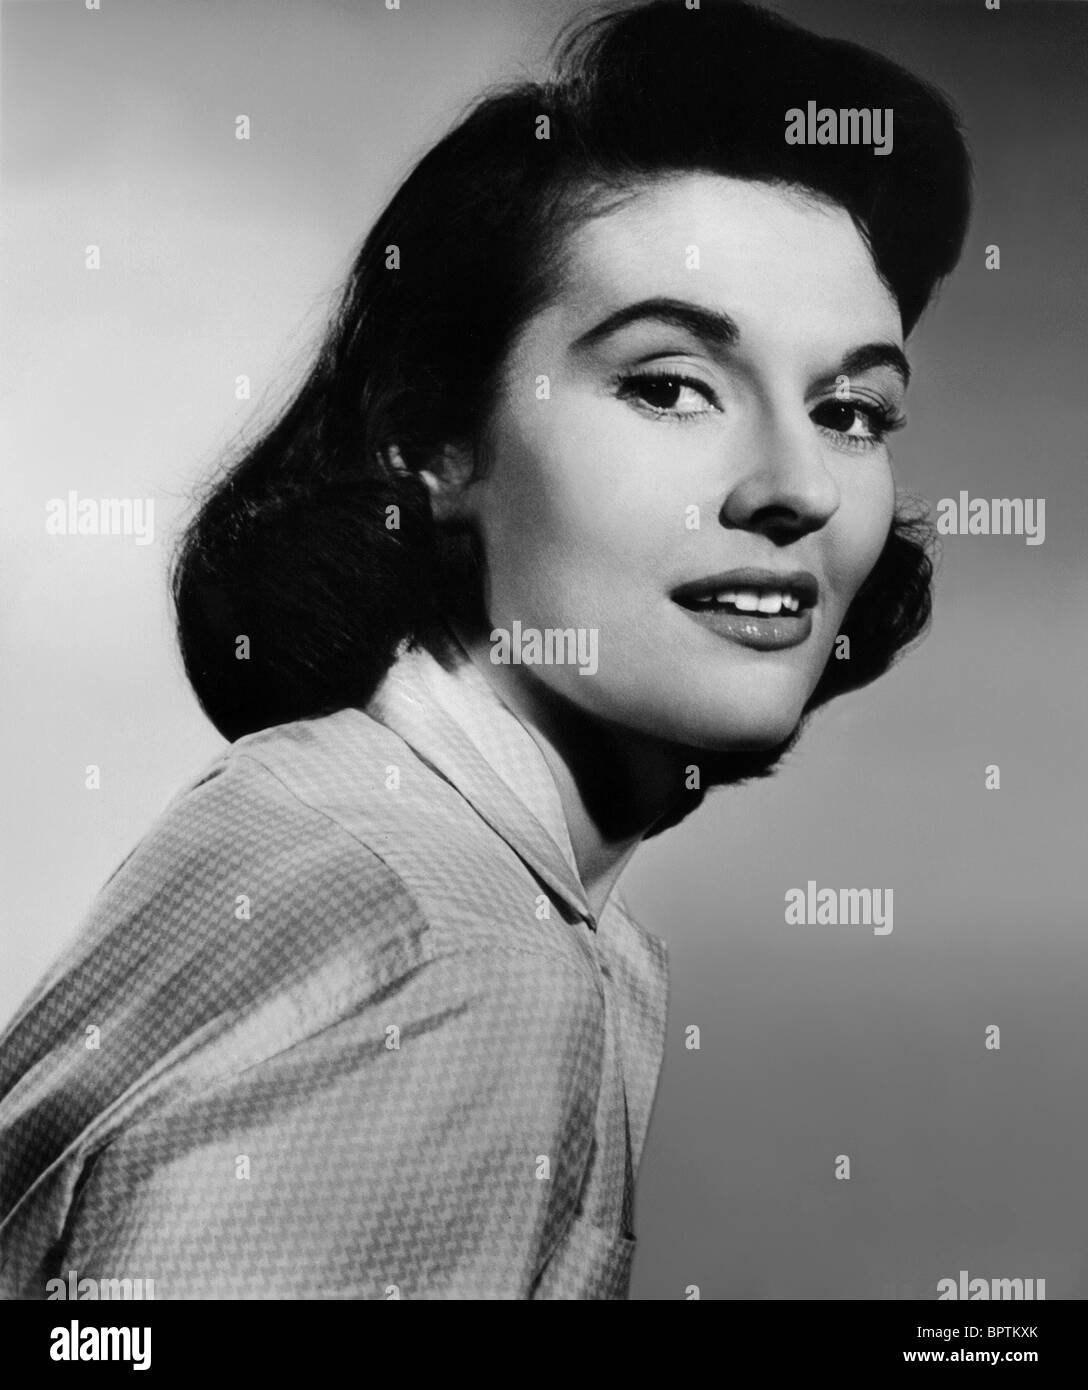 DIANNE FOSTER ACTRESS (1957) Stock Photo. 